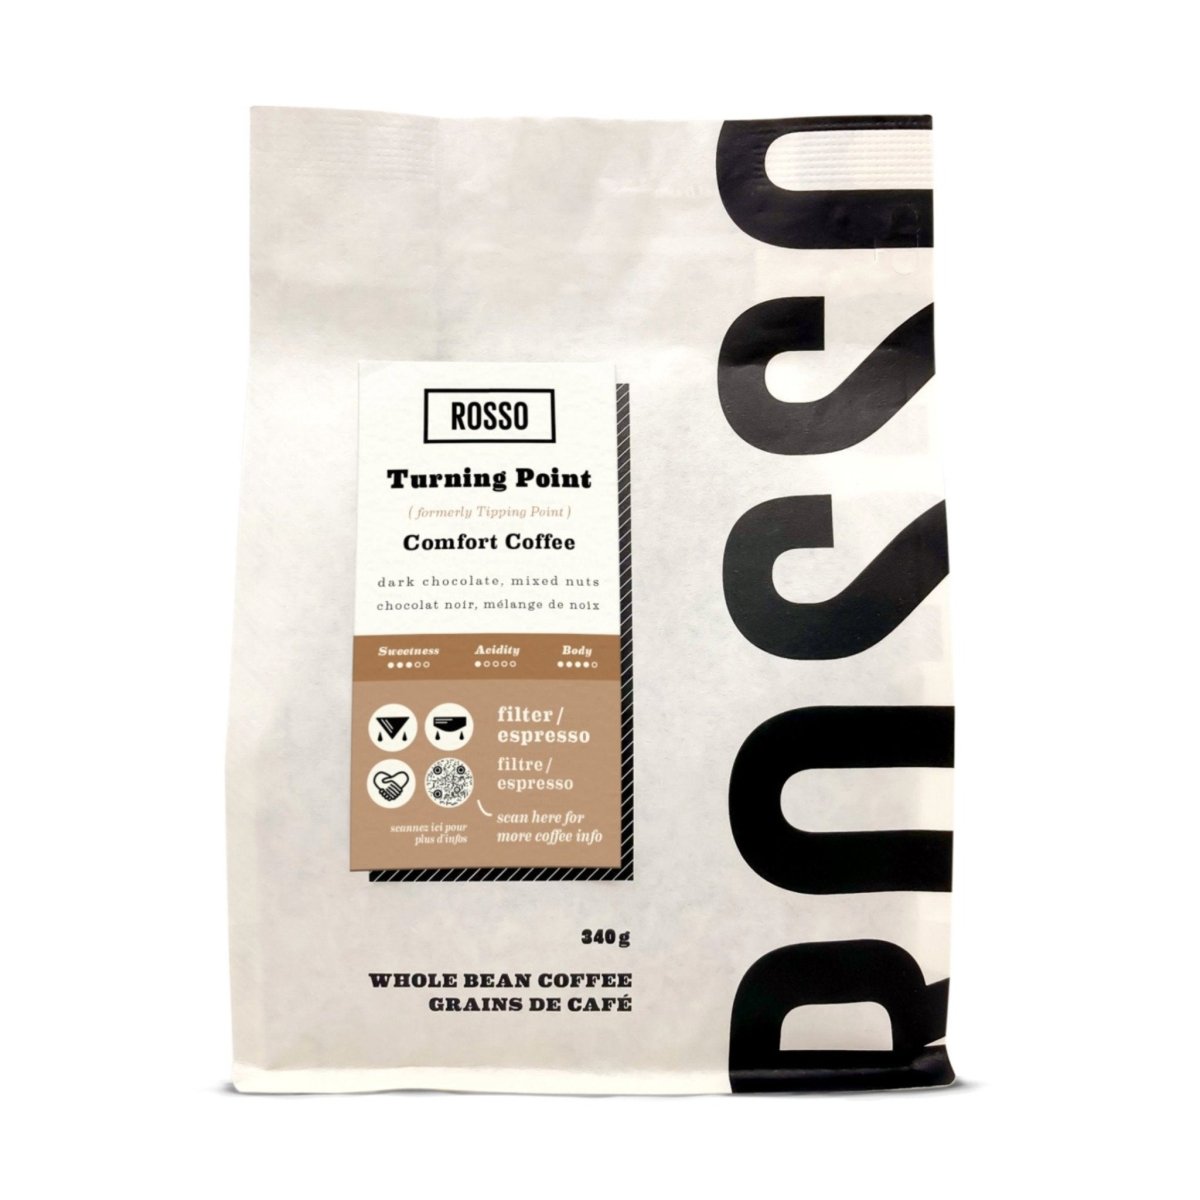 GotoPopupYYC - Rosso Coffee Roasters - Turning Point - Blend - 5lbs -ROSSO-5-0004